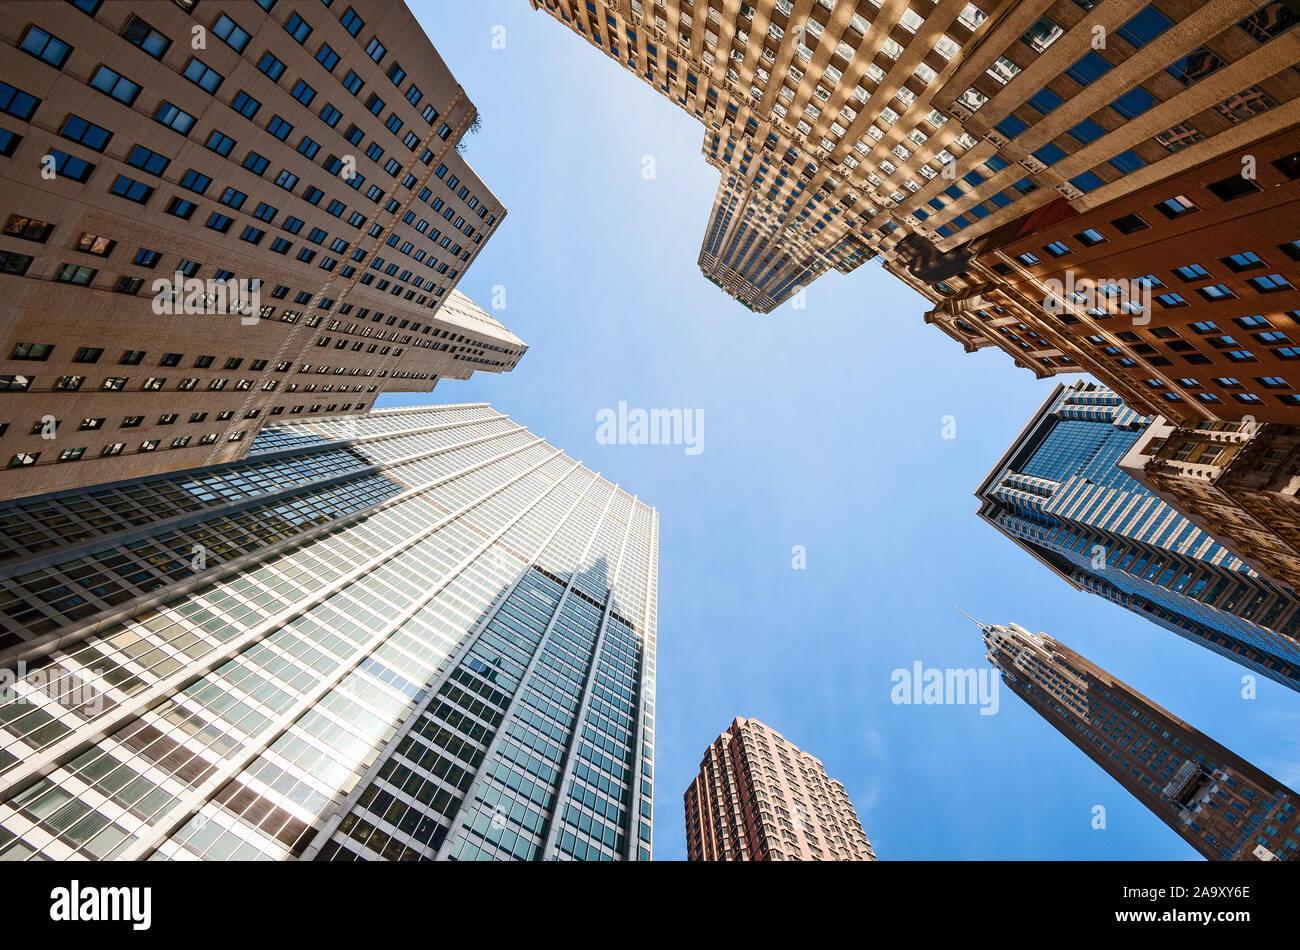 Looking up at Buildings New York City Financial District Skyscrapers Stock Photo